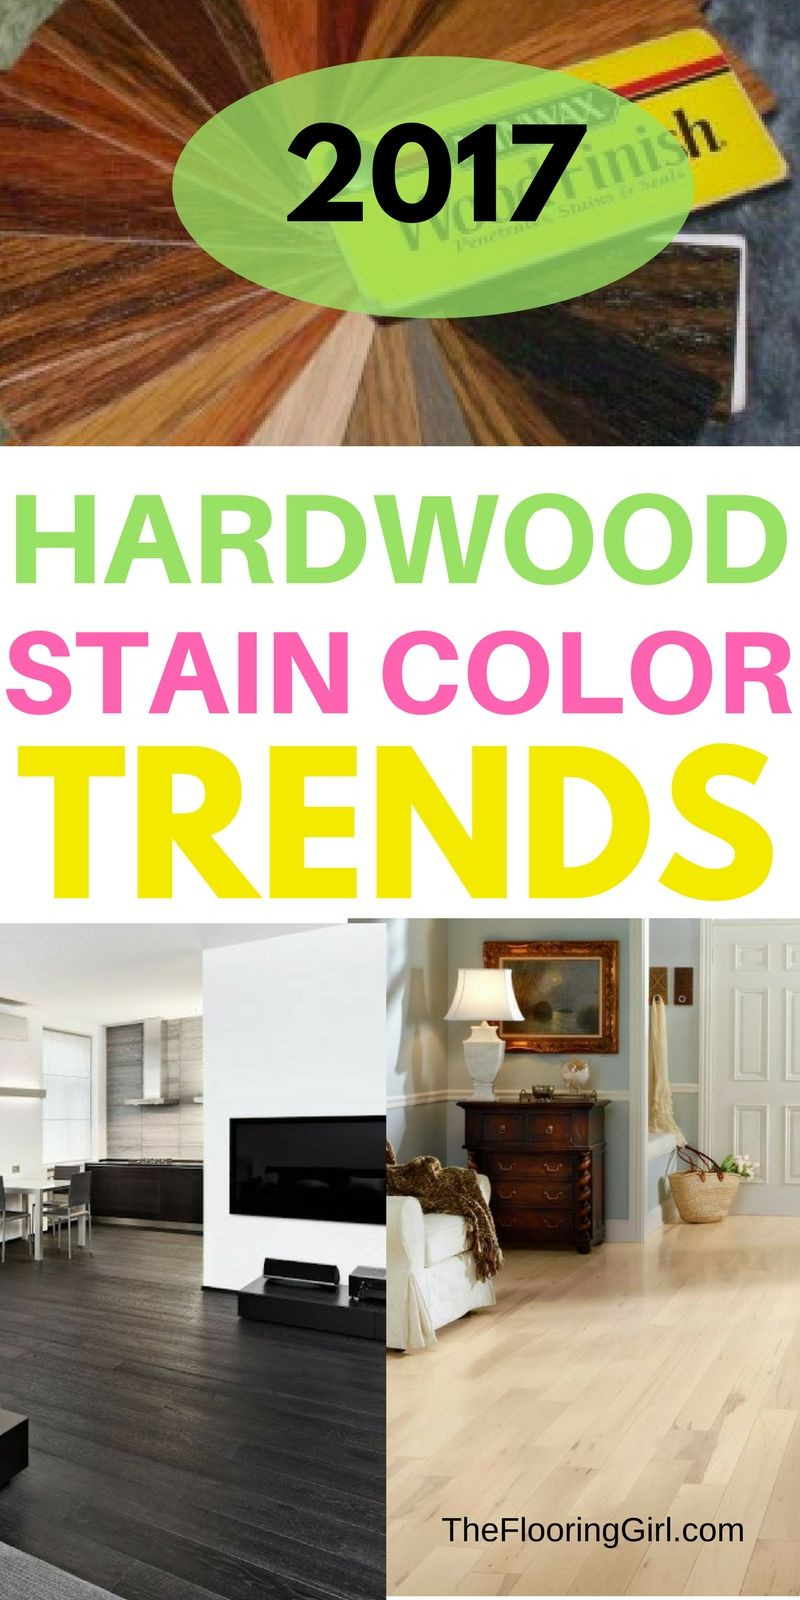 26 Unique Bruce Hardwood Flooring Suppliers 2024 free download bruce hardwood flooring suppliers of hardwood flooring stain color trends 2018 more from the flooring throughout hardwood flooring stain color trends for 2017 hardwood colors that are in sty